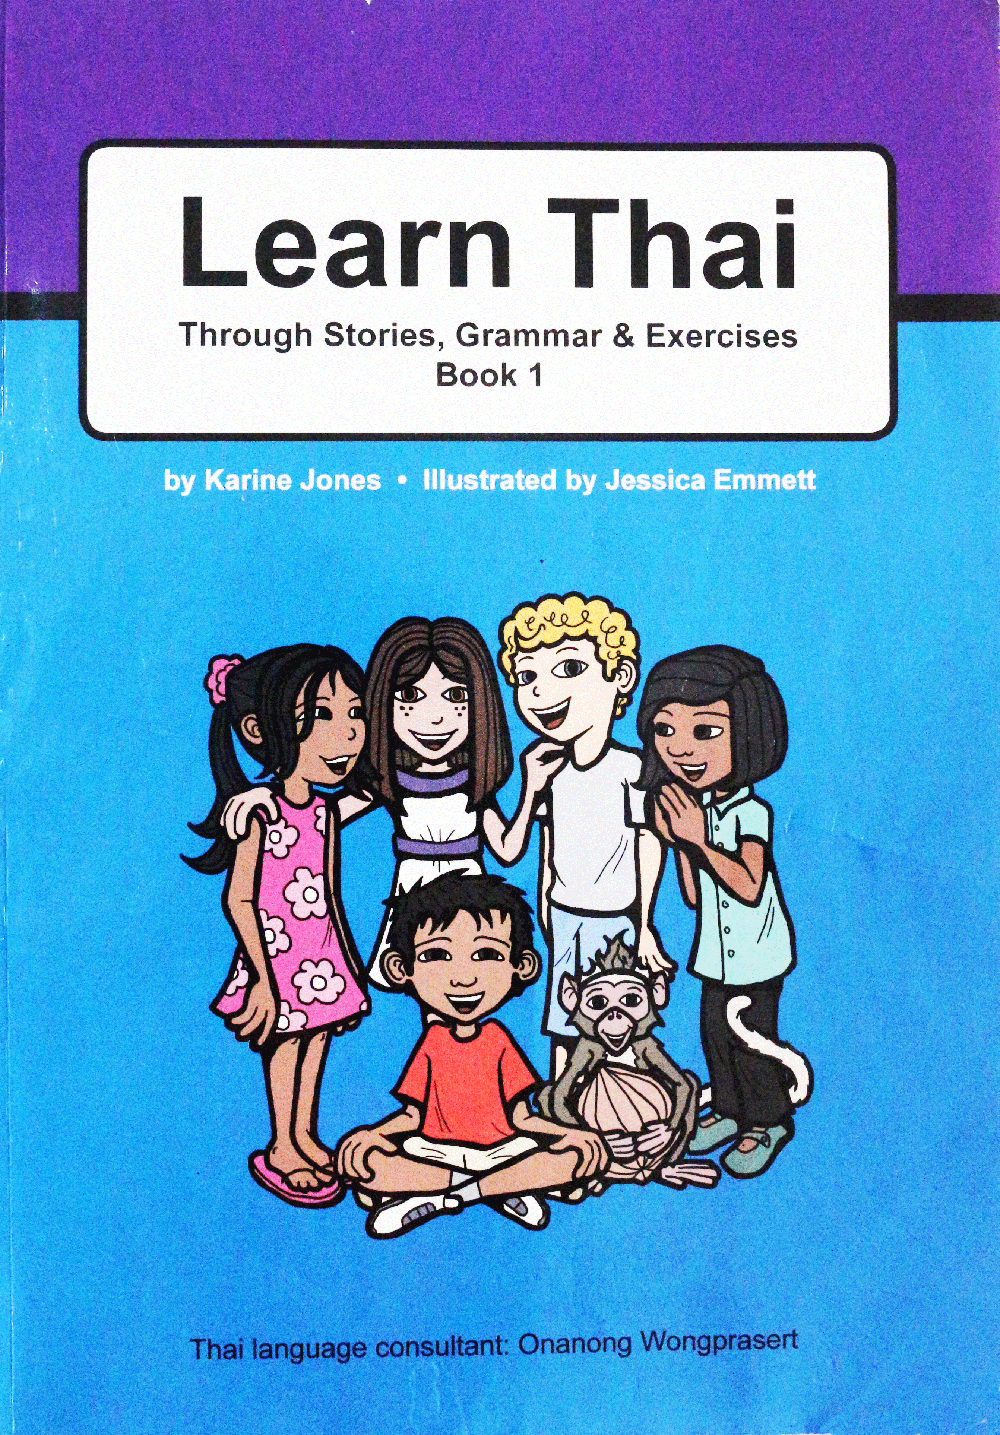 Learn Thai Book 1 Contents